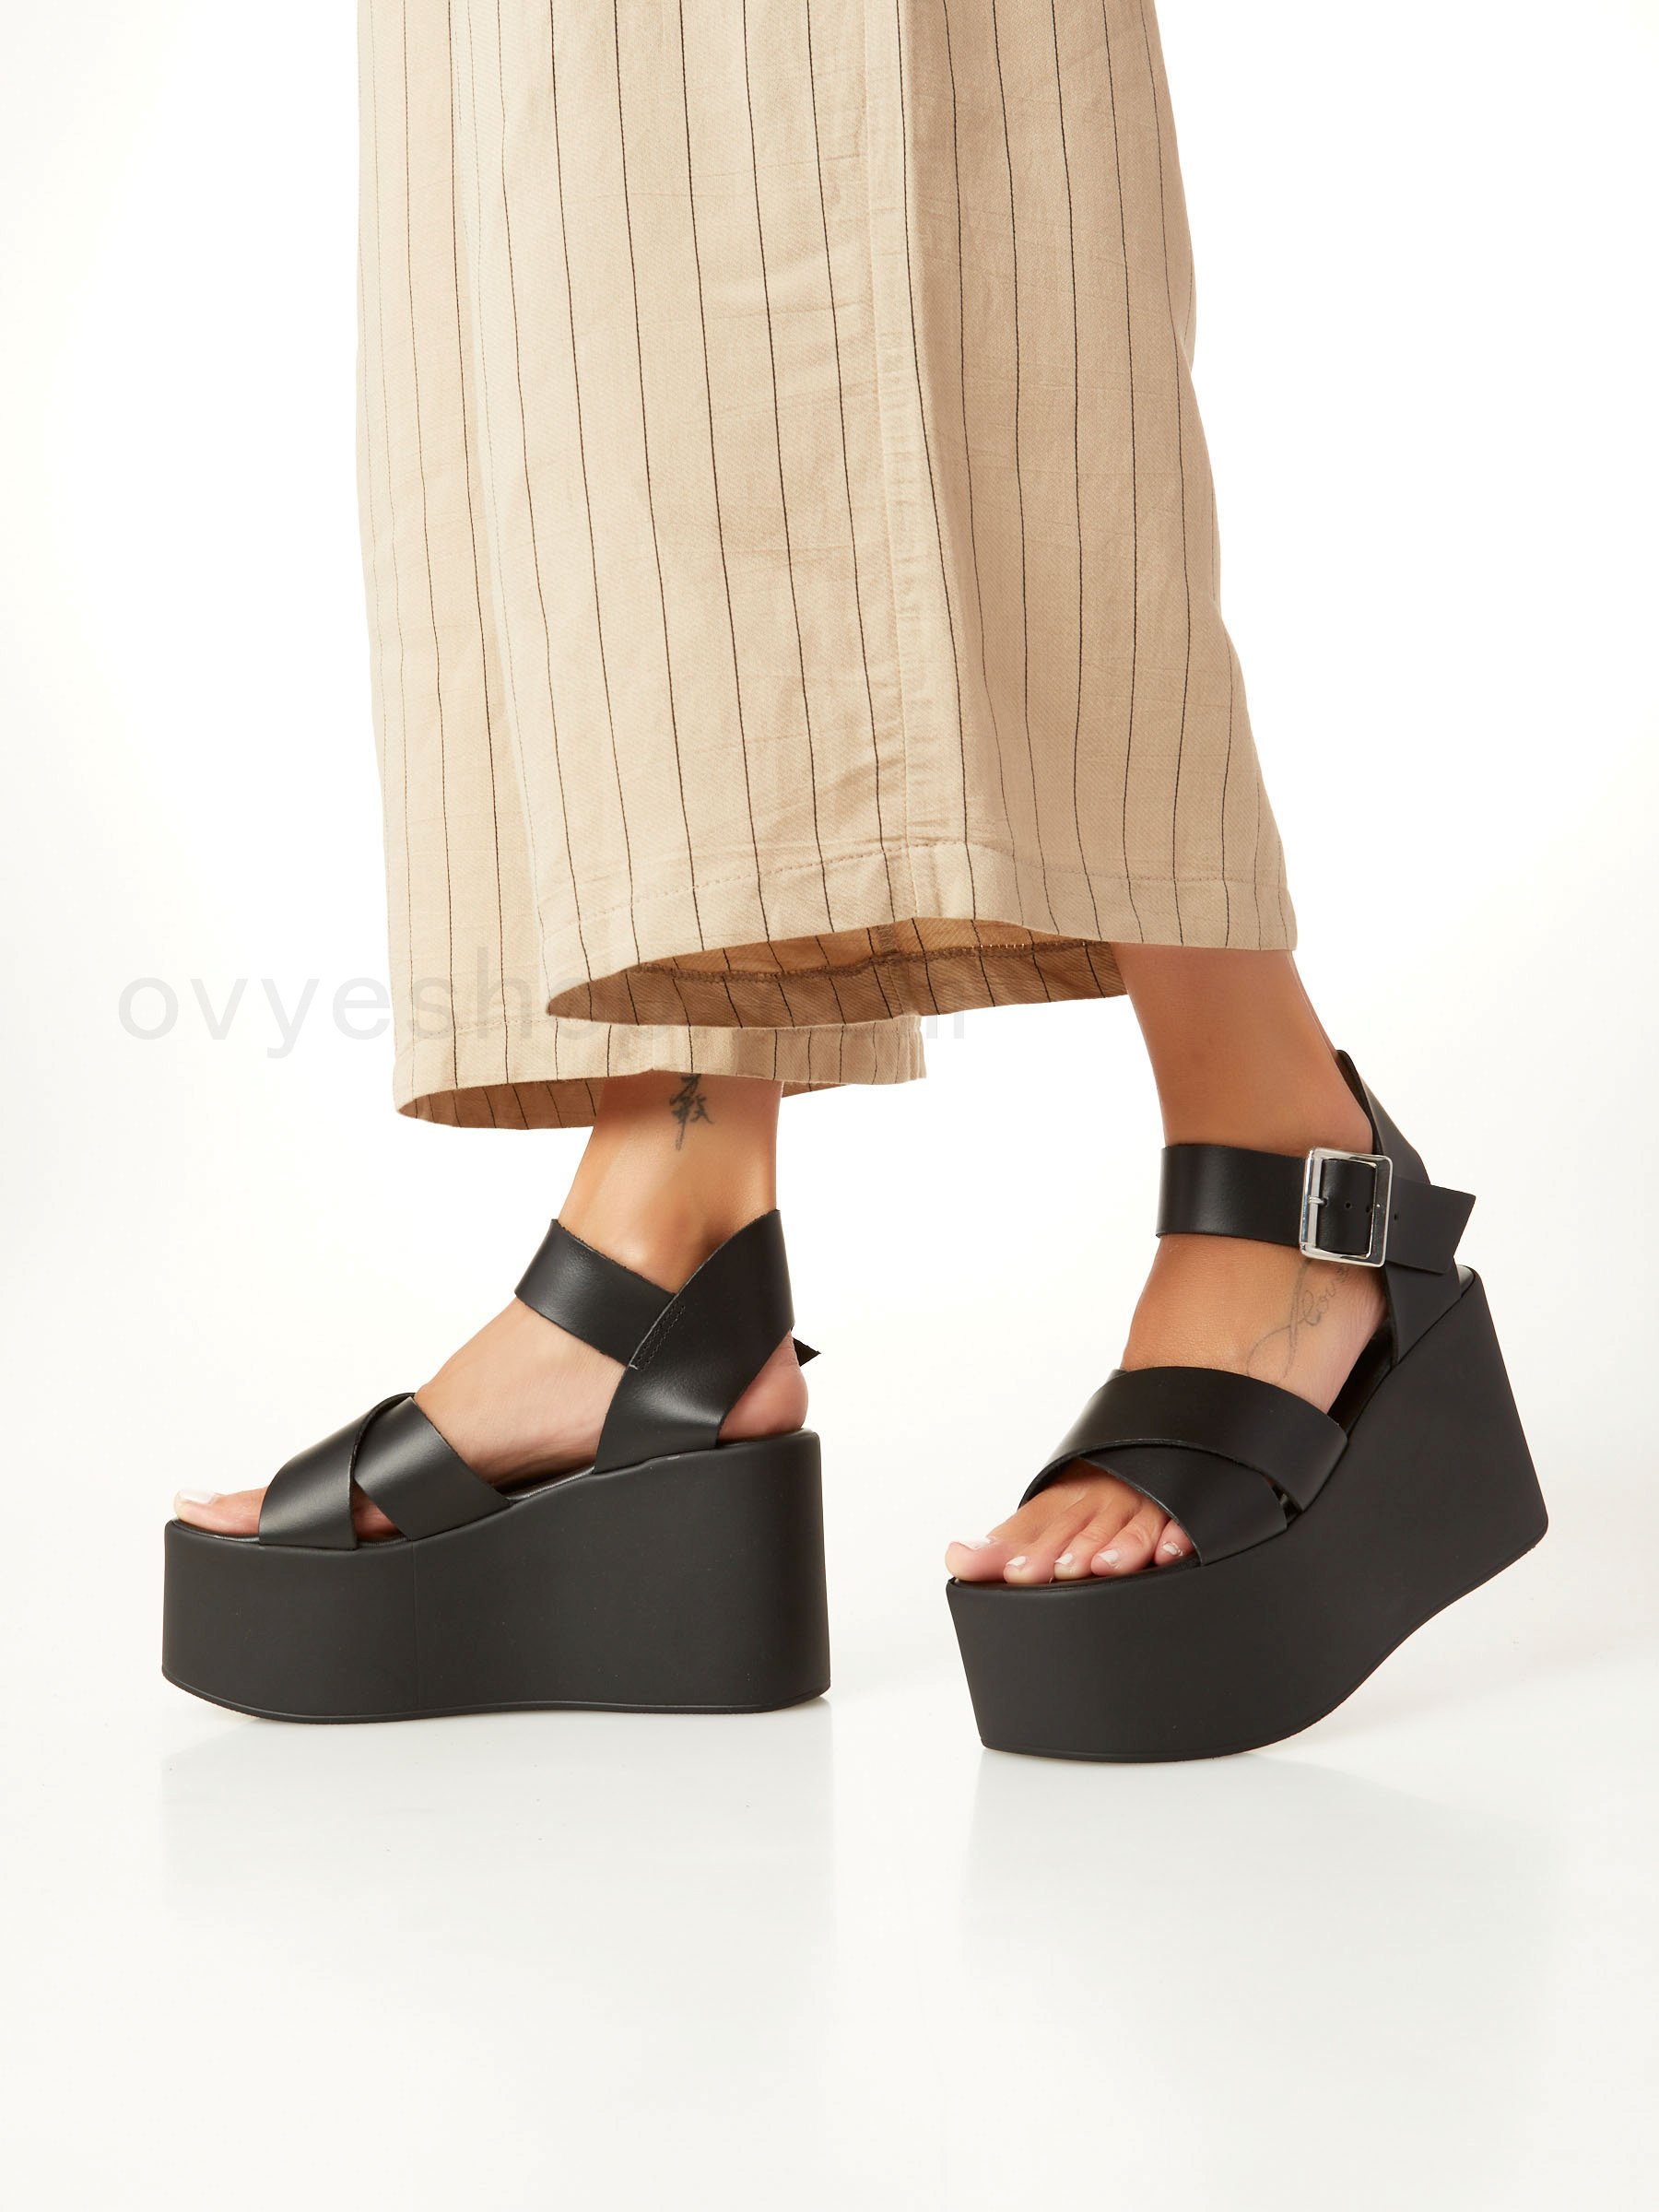 (image for) ovye online Leather Sandal With Wedge F0817885-0546 Negozi